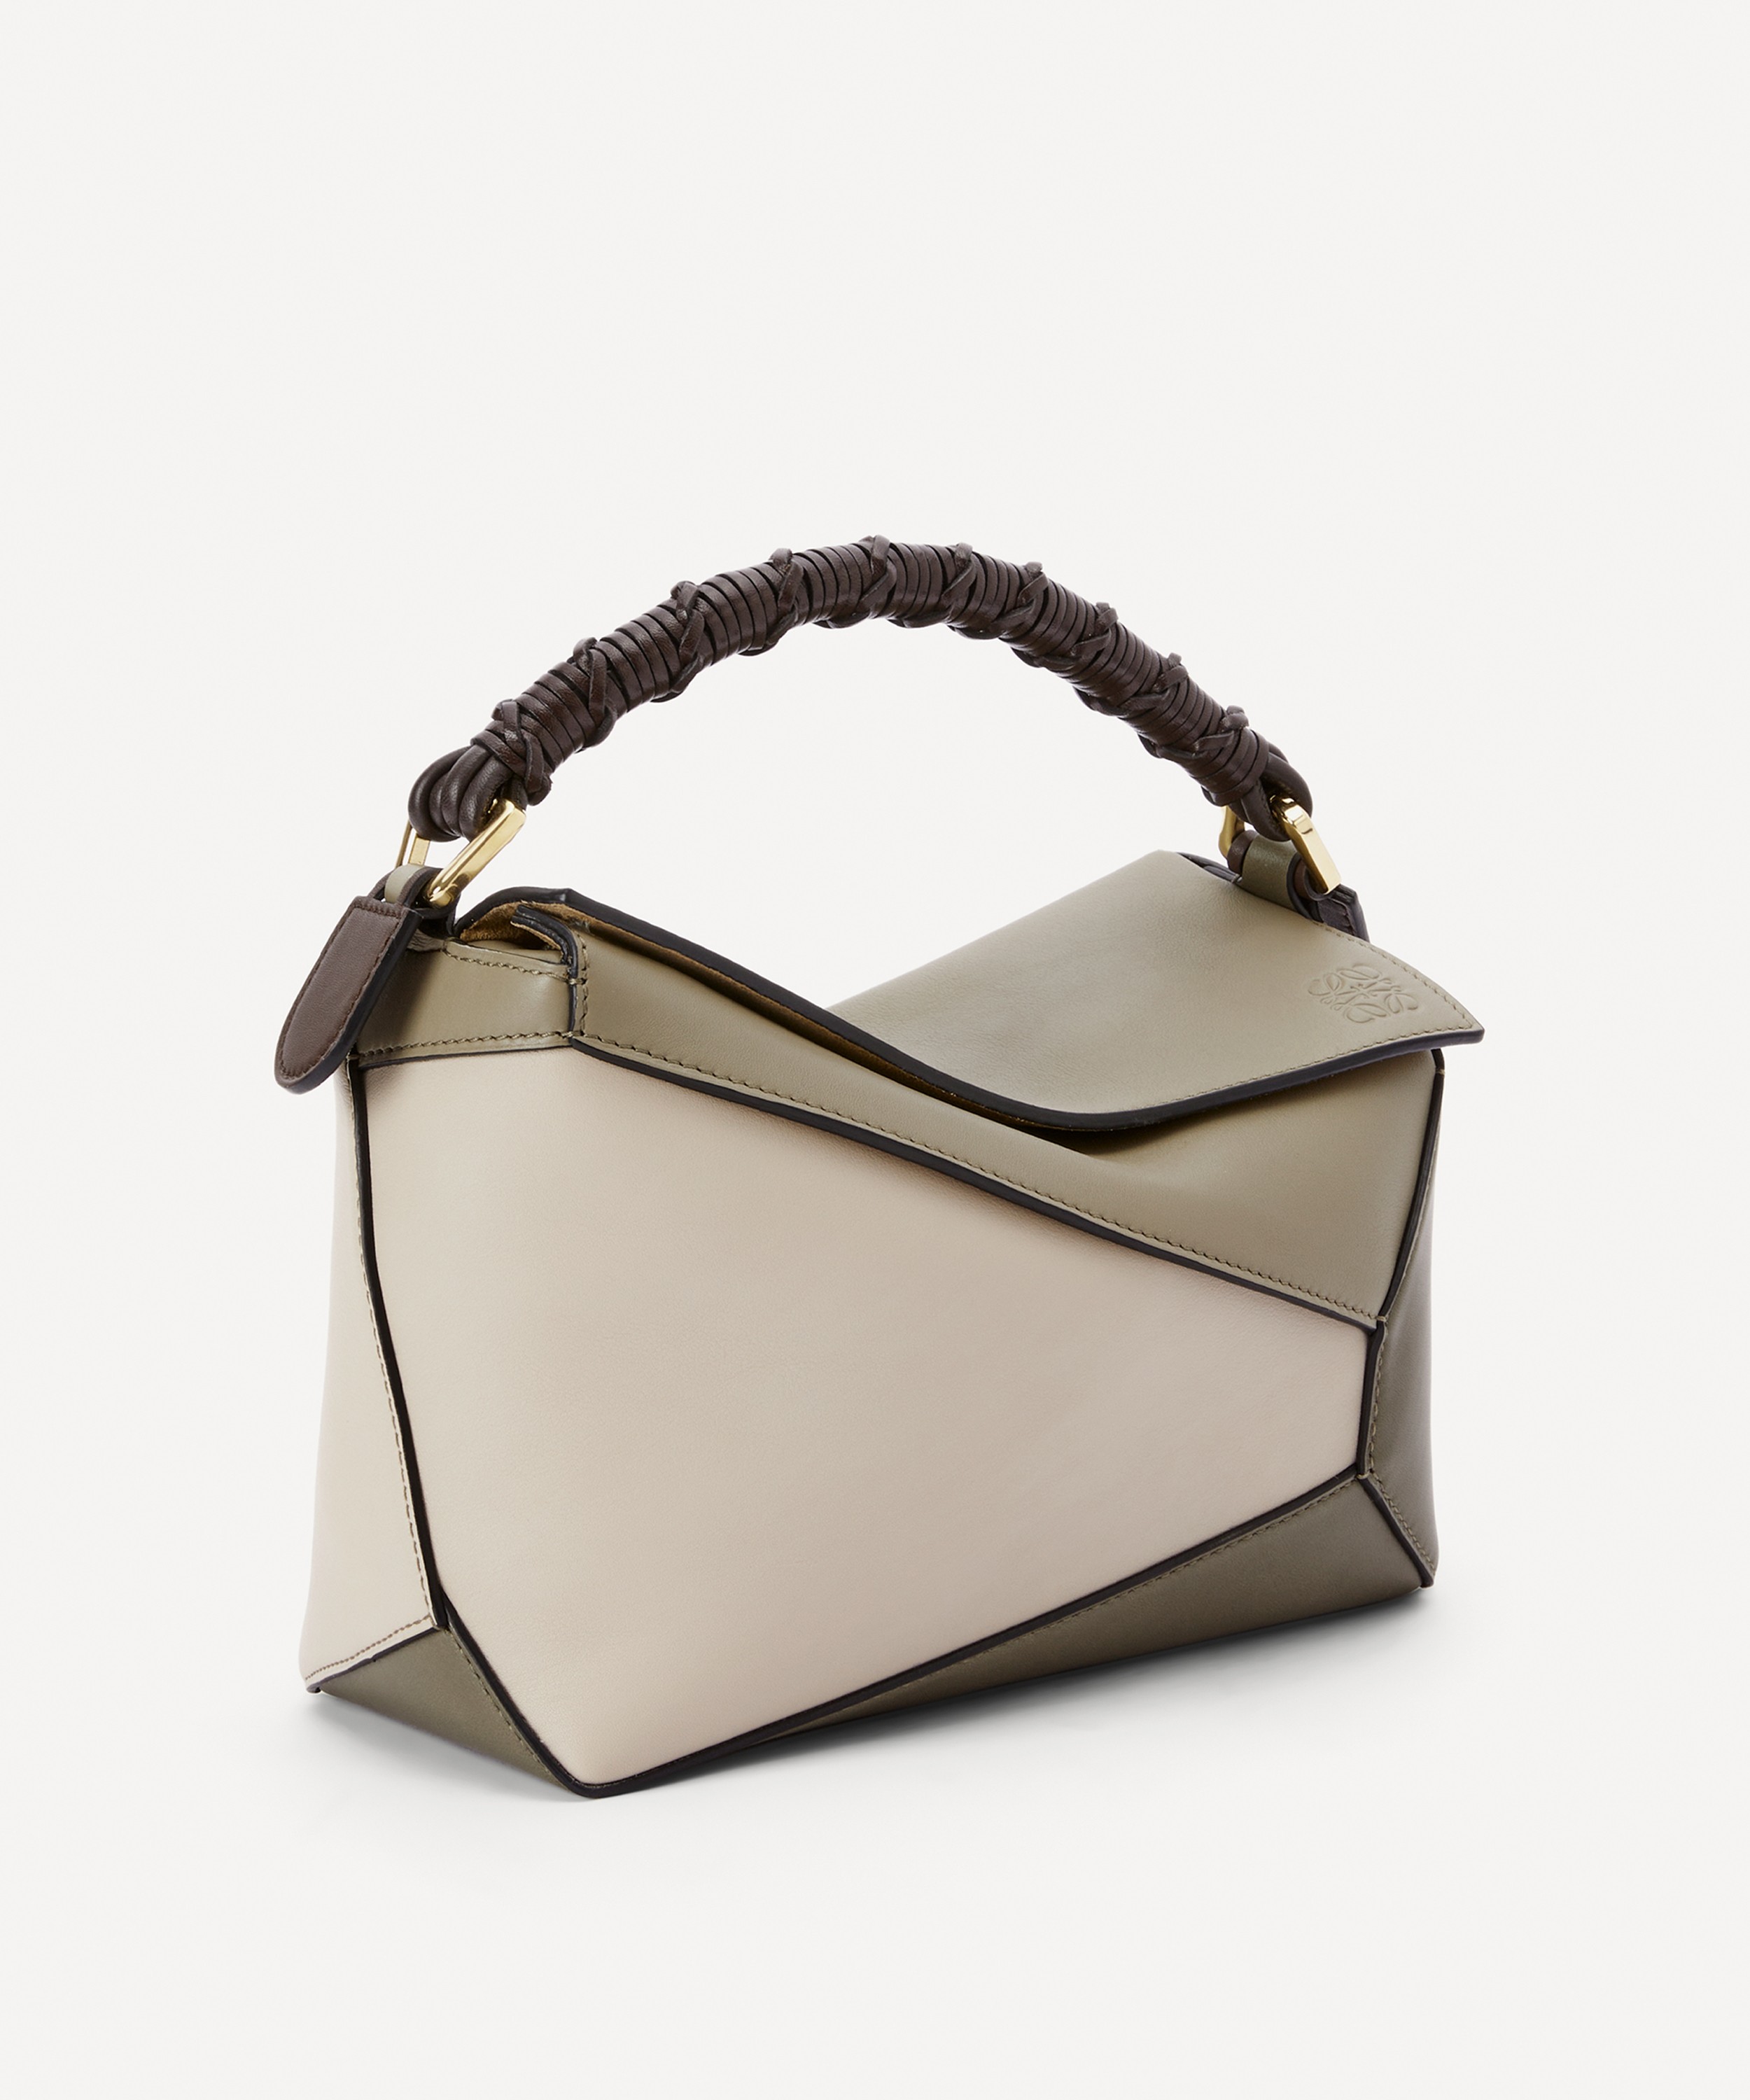 Women's Two-tone Small 'puzzle' Bag by Loewe